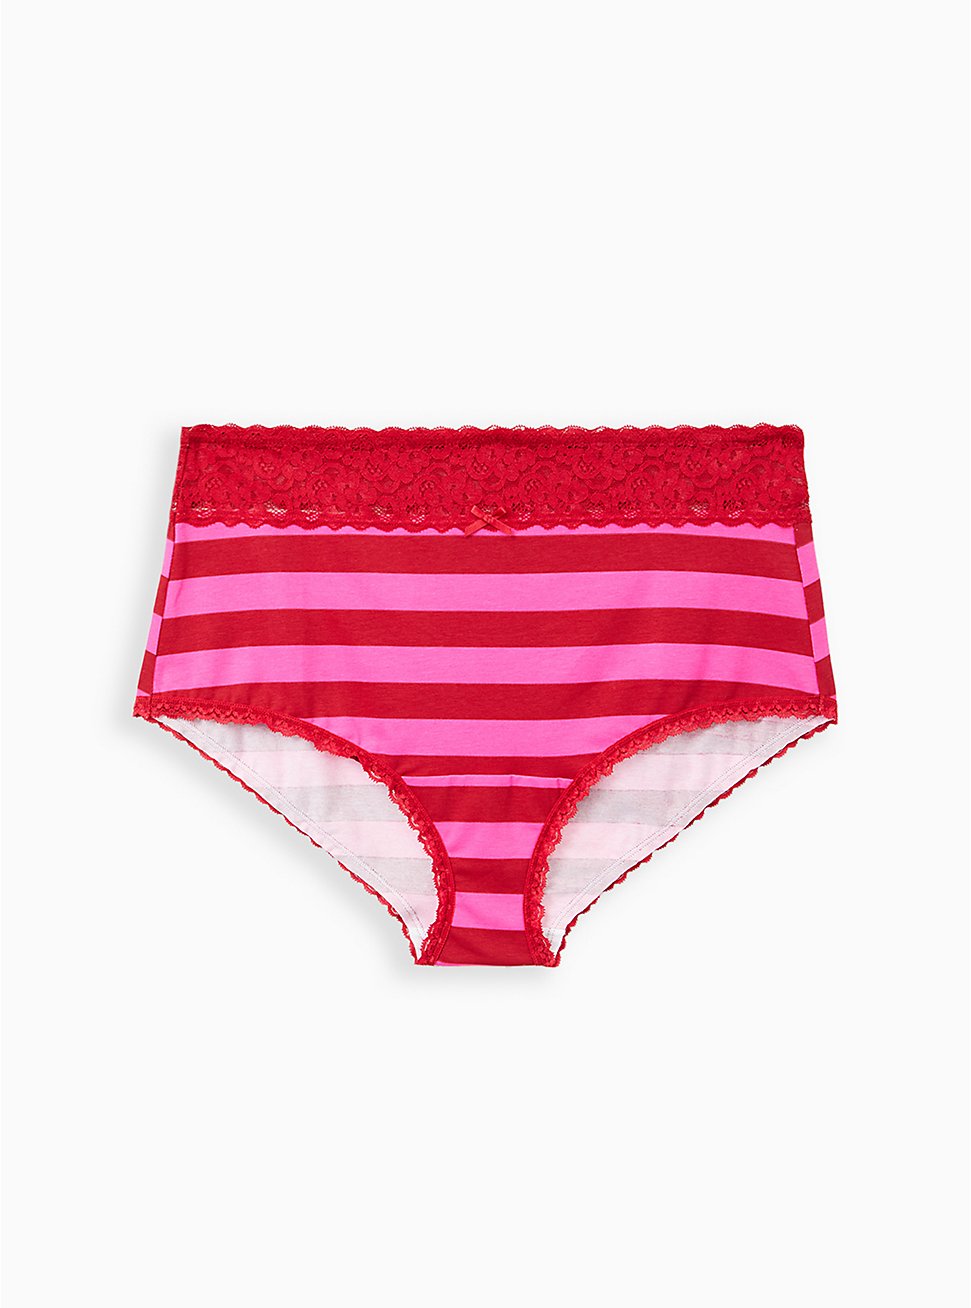 Wide Lace Trim Brief Panty - Cotton Stripe Red & Pink, , hi-res